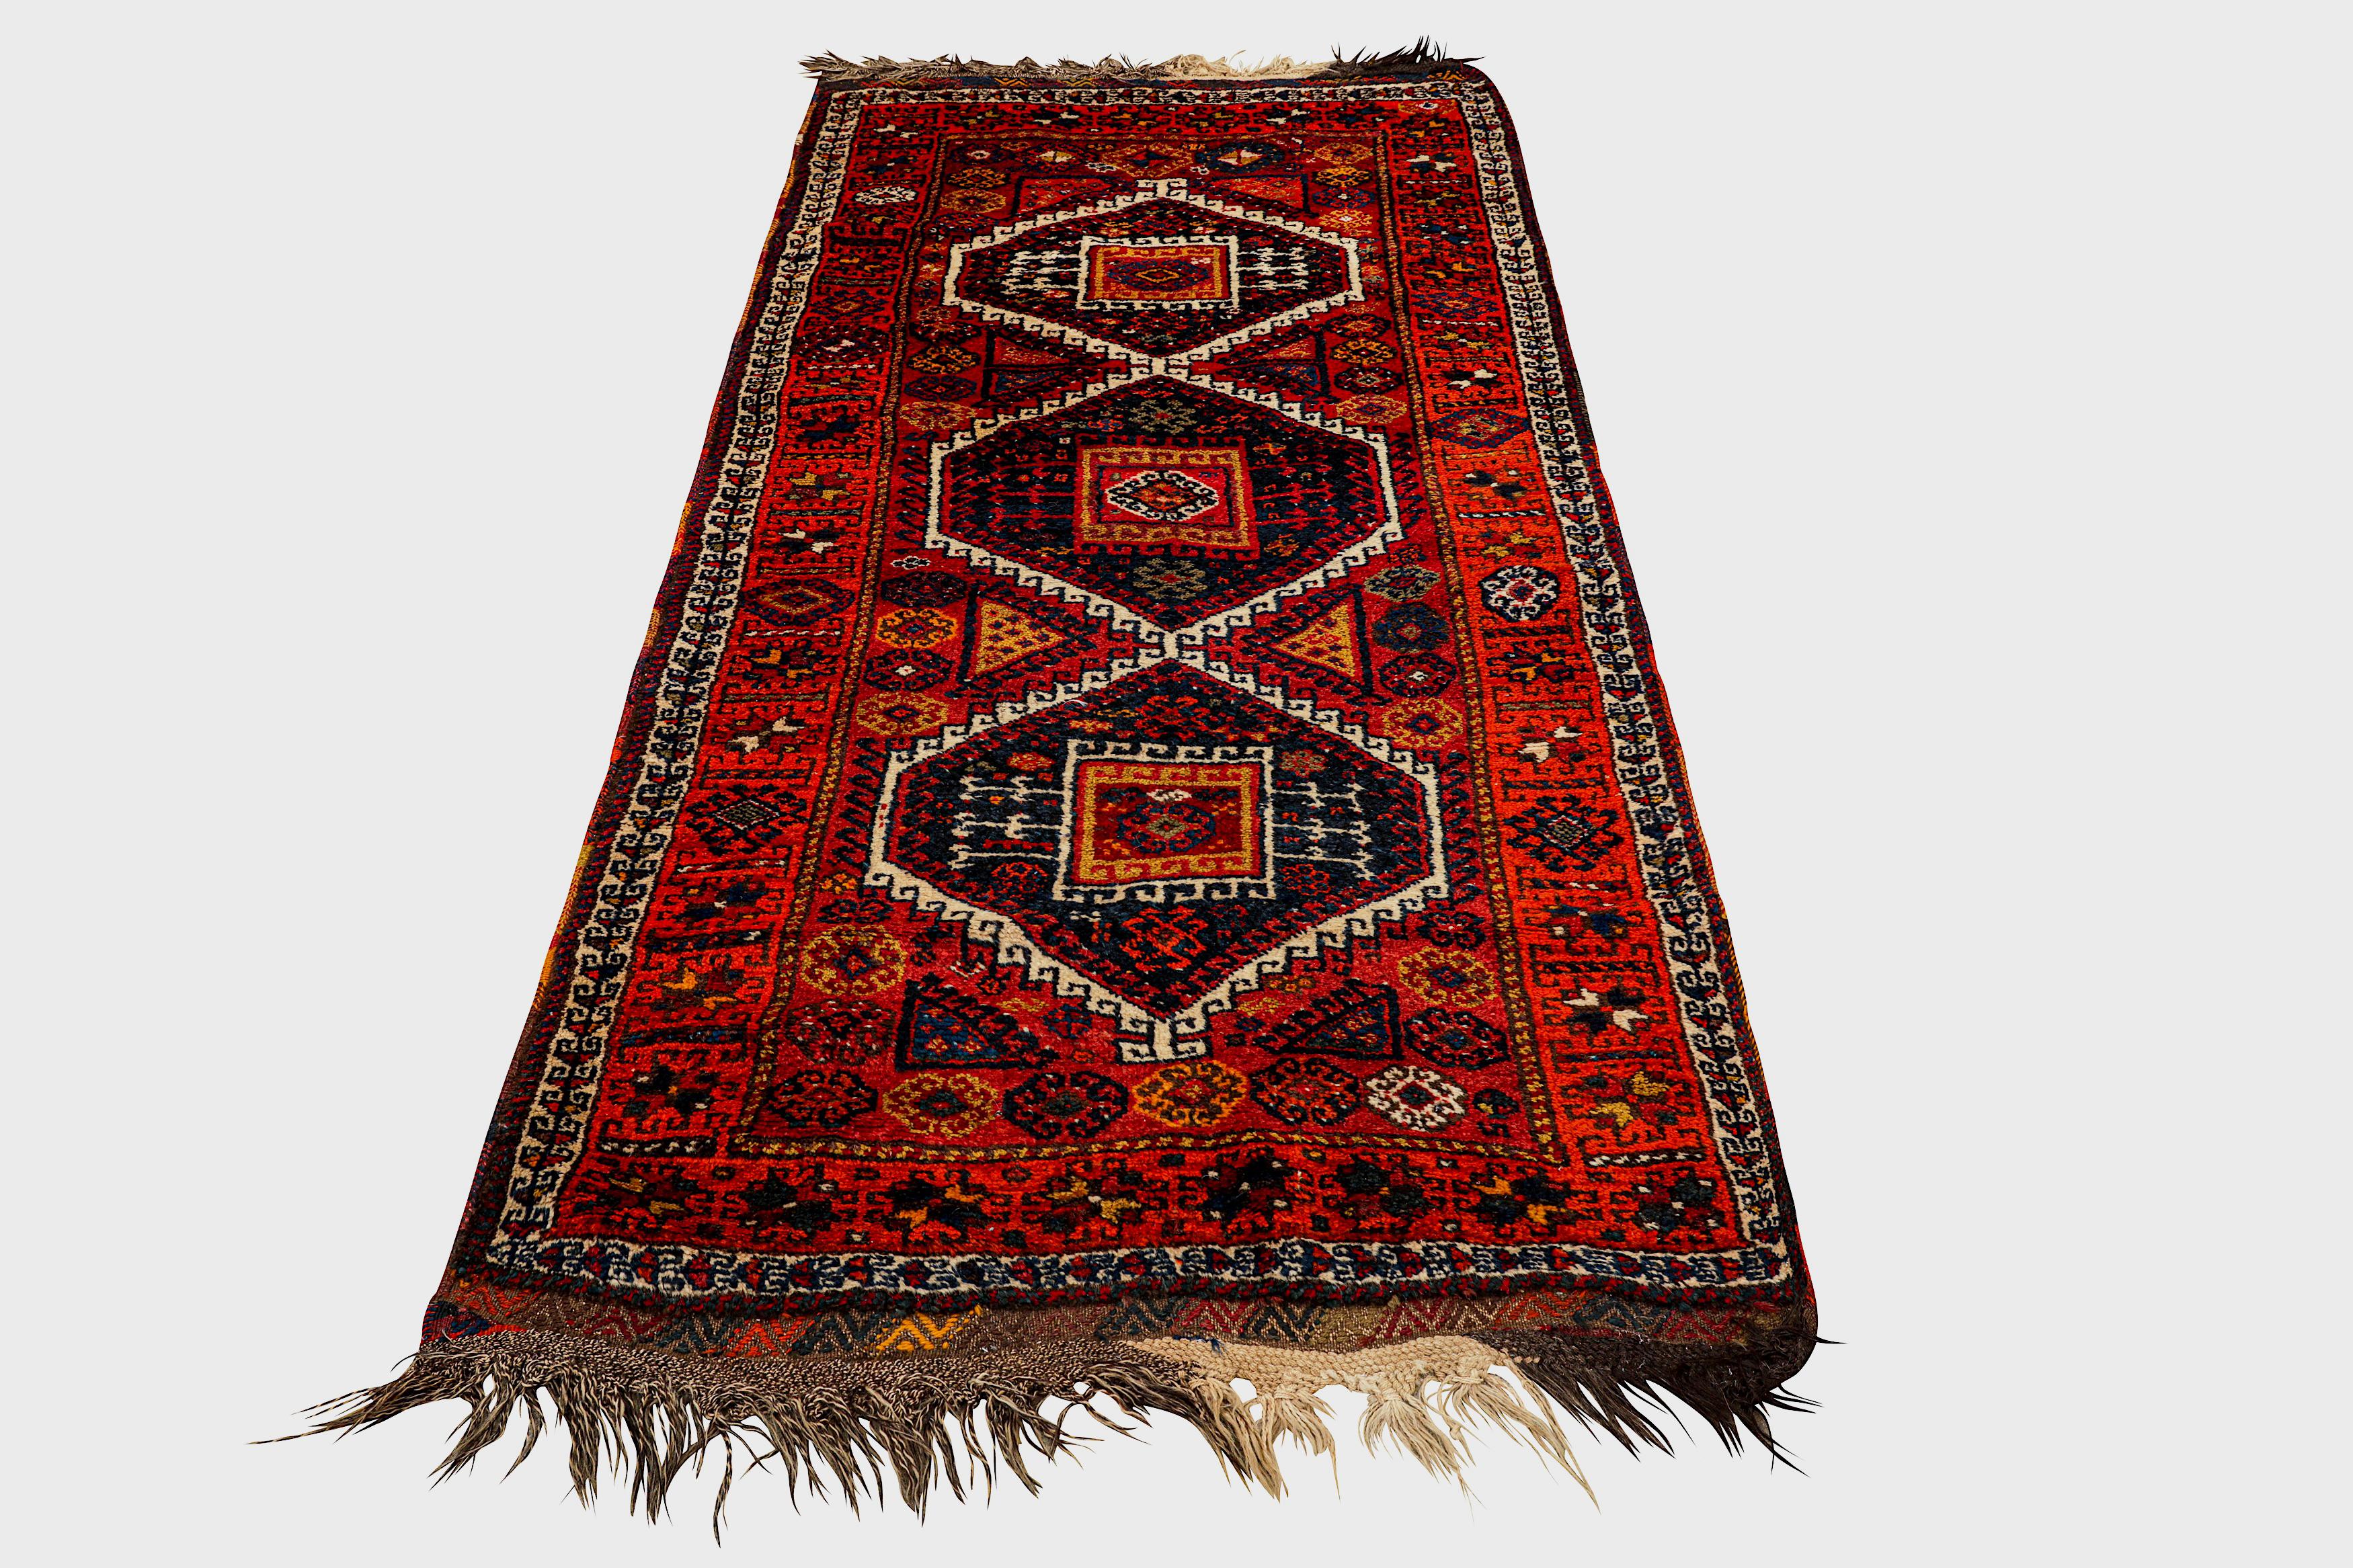 Antique 19th Century Fine Turkish Yuruk Long Runner Rug 7ft 4in x 3ft 6in

224cm. x 107cm. 

Classic for this type with various polychrome hooked panels around three bold multicoloured hooked double medallions. In hooked flowerhead and hooked